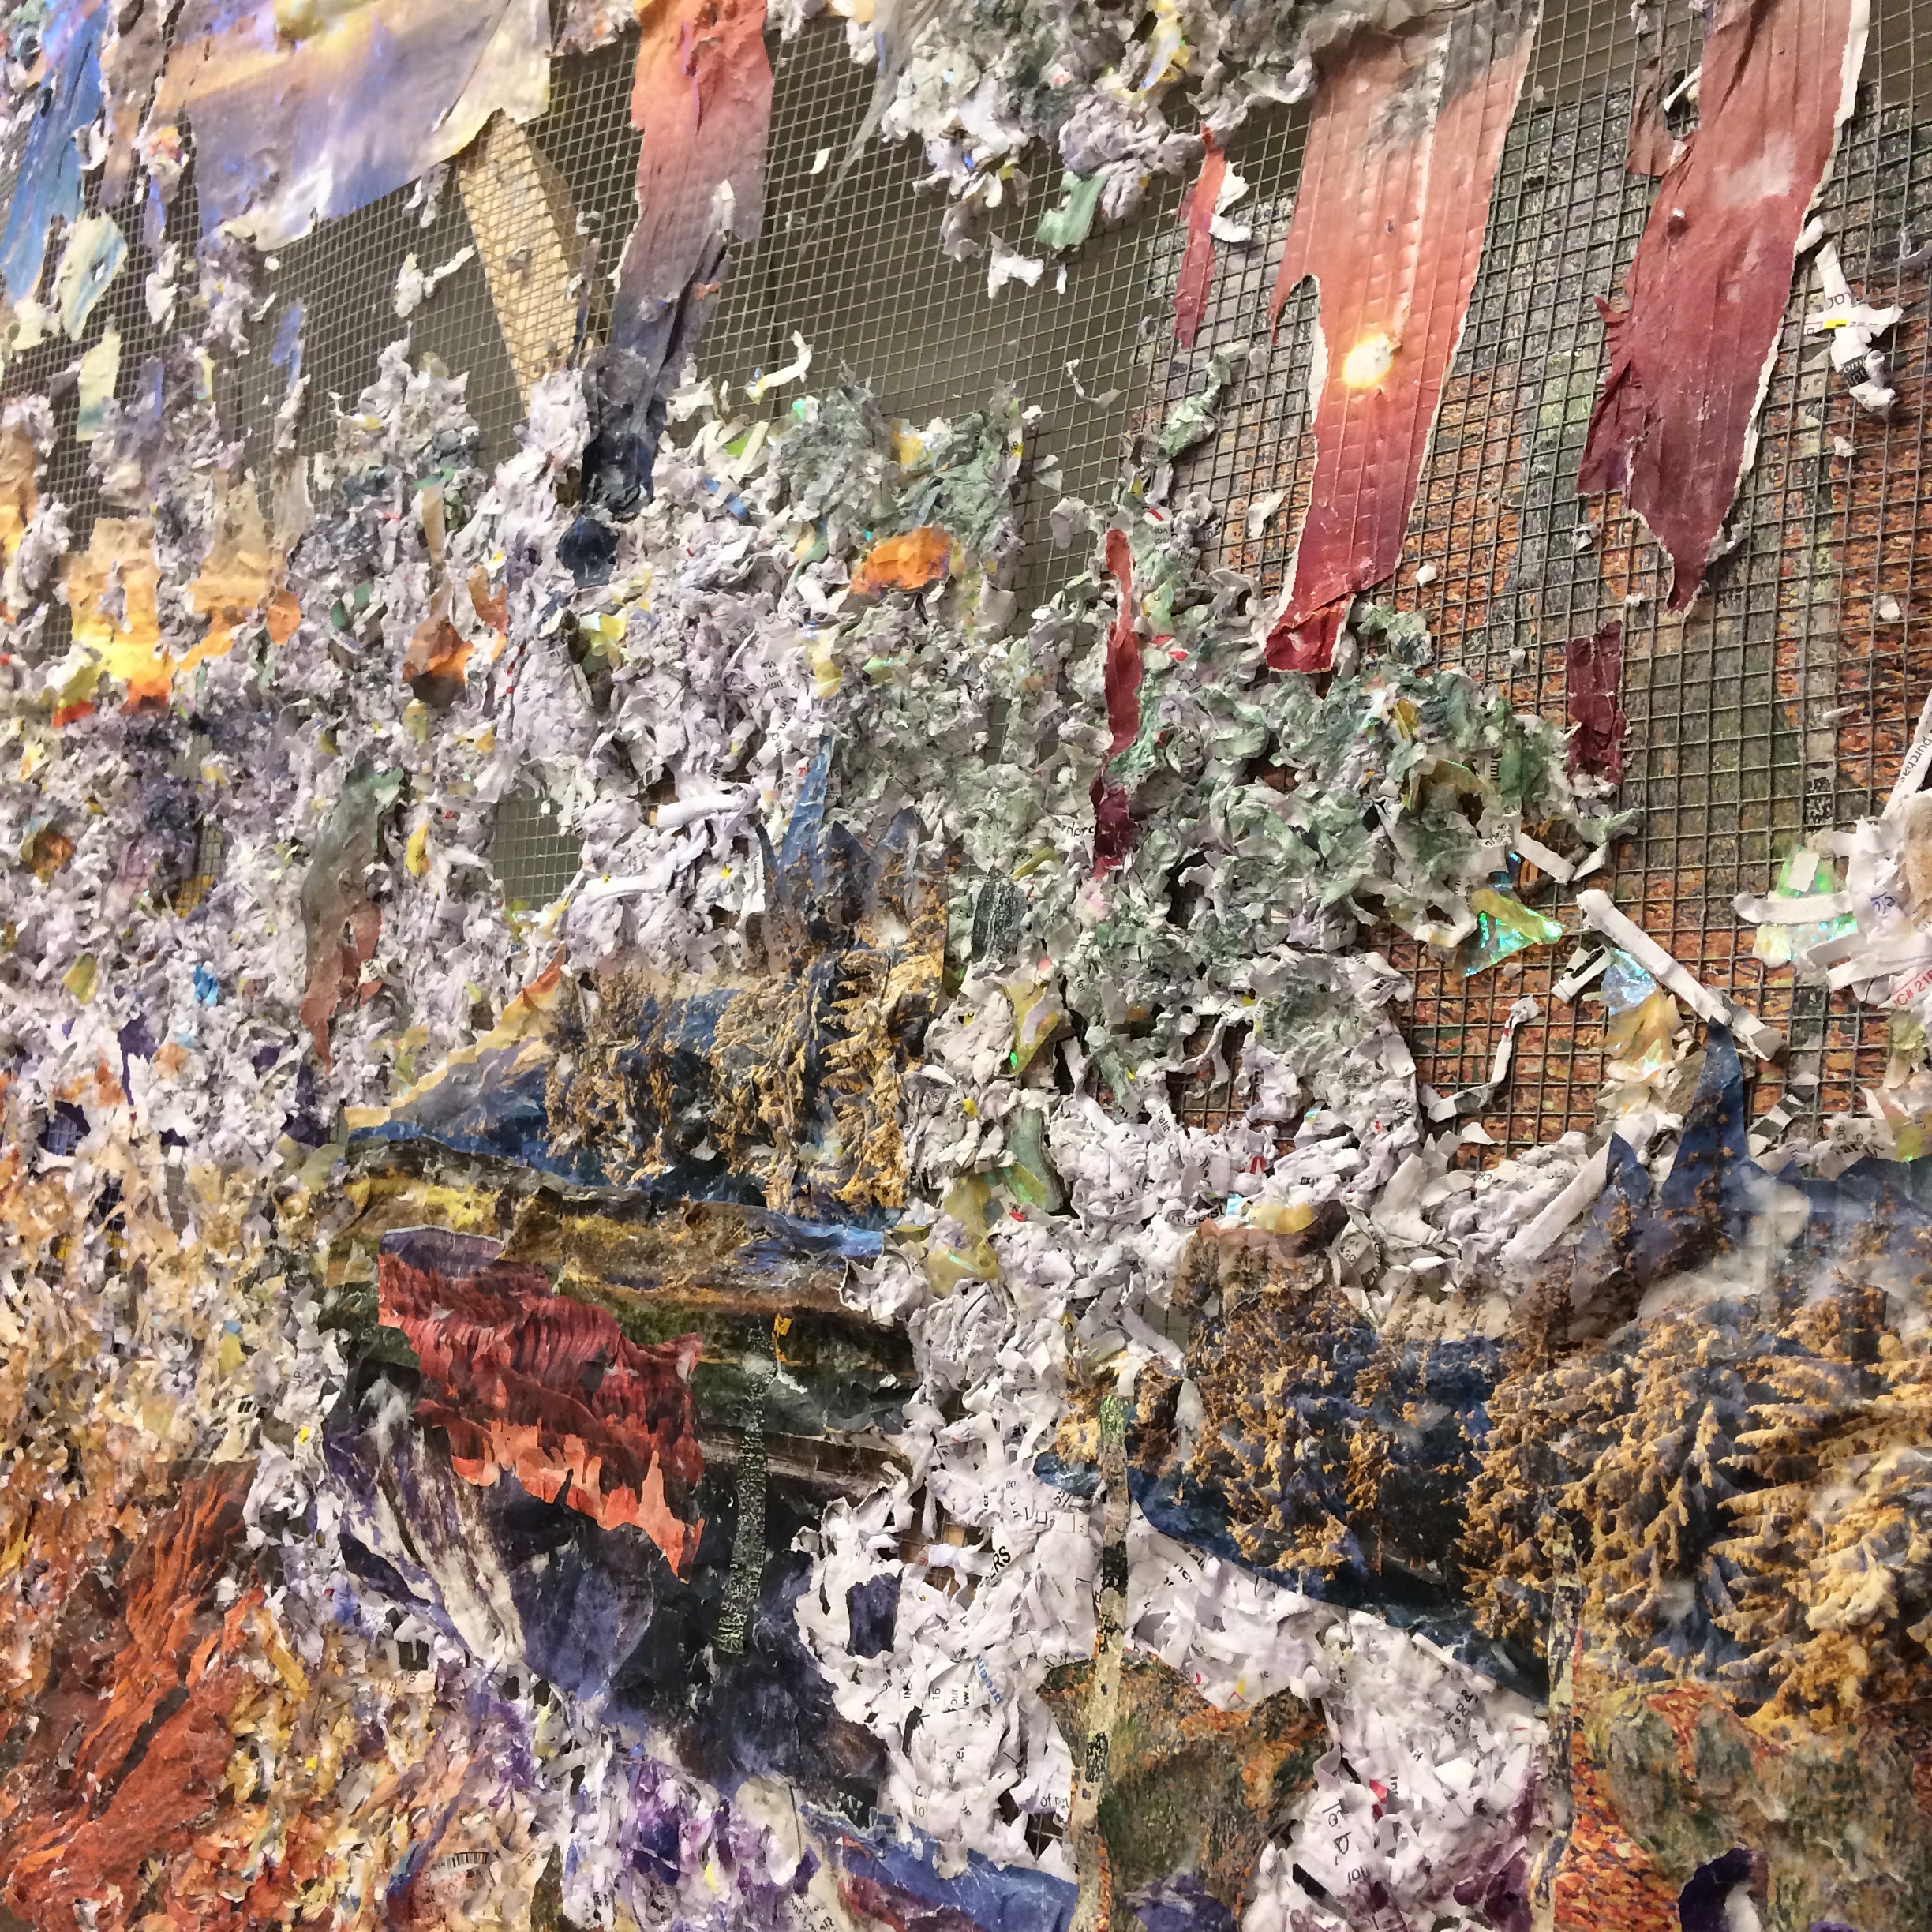   How Do I Raise the Ground Where I Land  (detail) , &nbsp;2017,&nbsp;Medical records, Banig print wallpaper, puzzle pieces, nature calendars, Dollar Tree and Subway bag, acrylic and oil on chicken wire and wood, 38 x 60 x 4 inches 